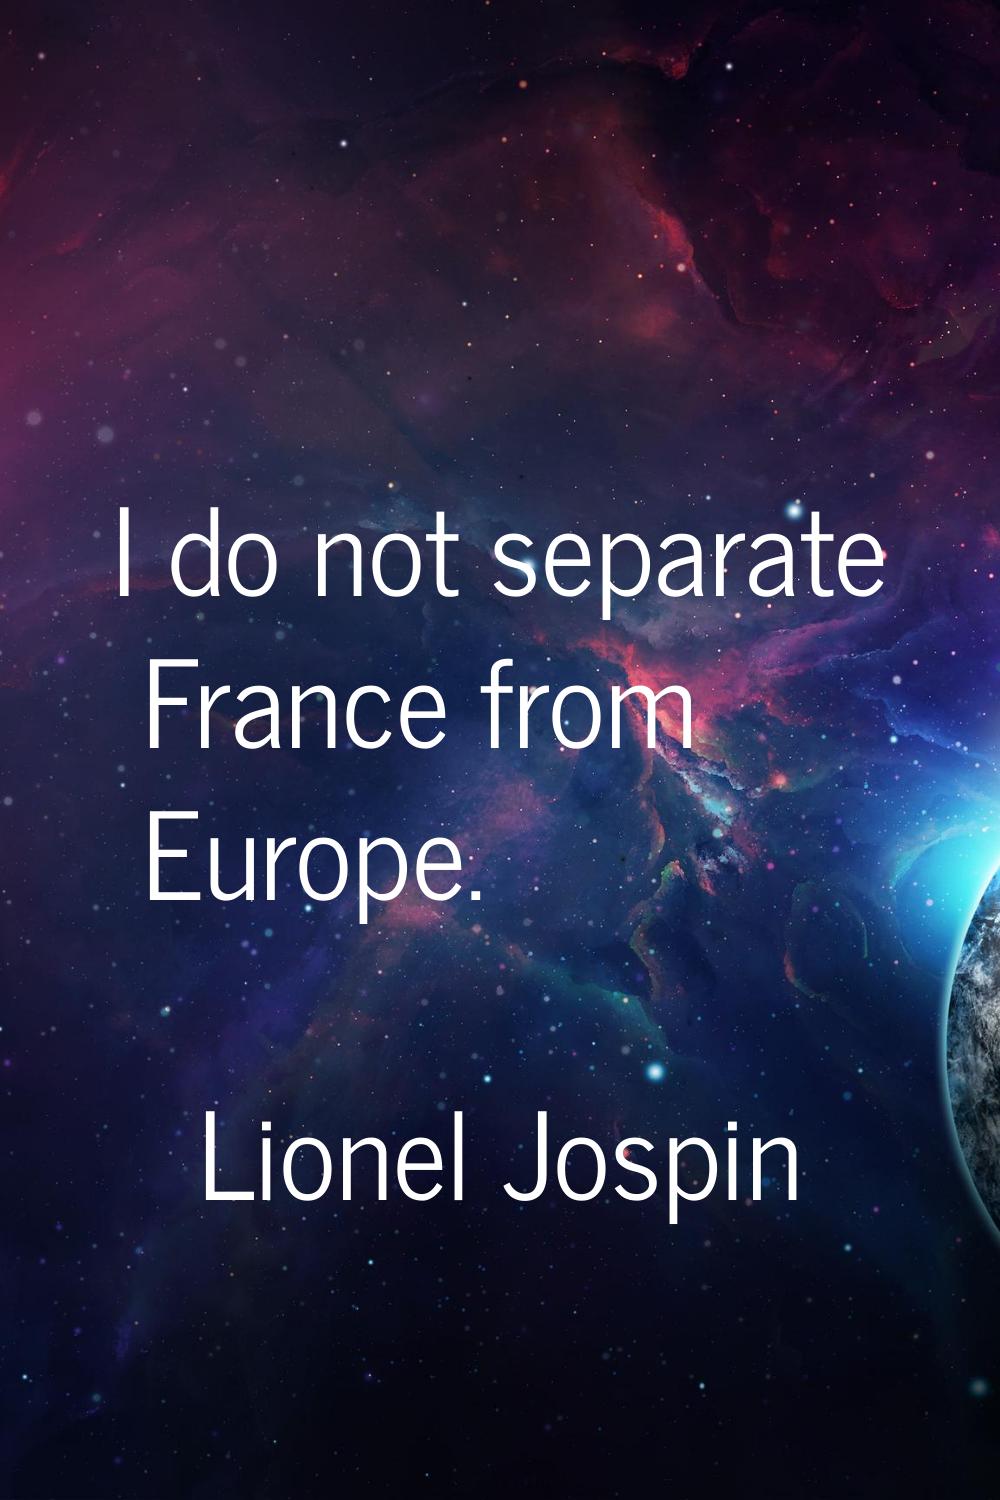 I do not separate France from Europe.